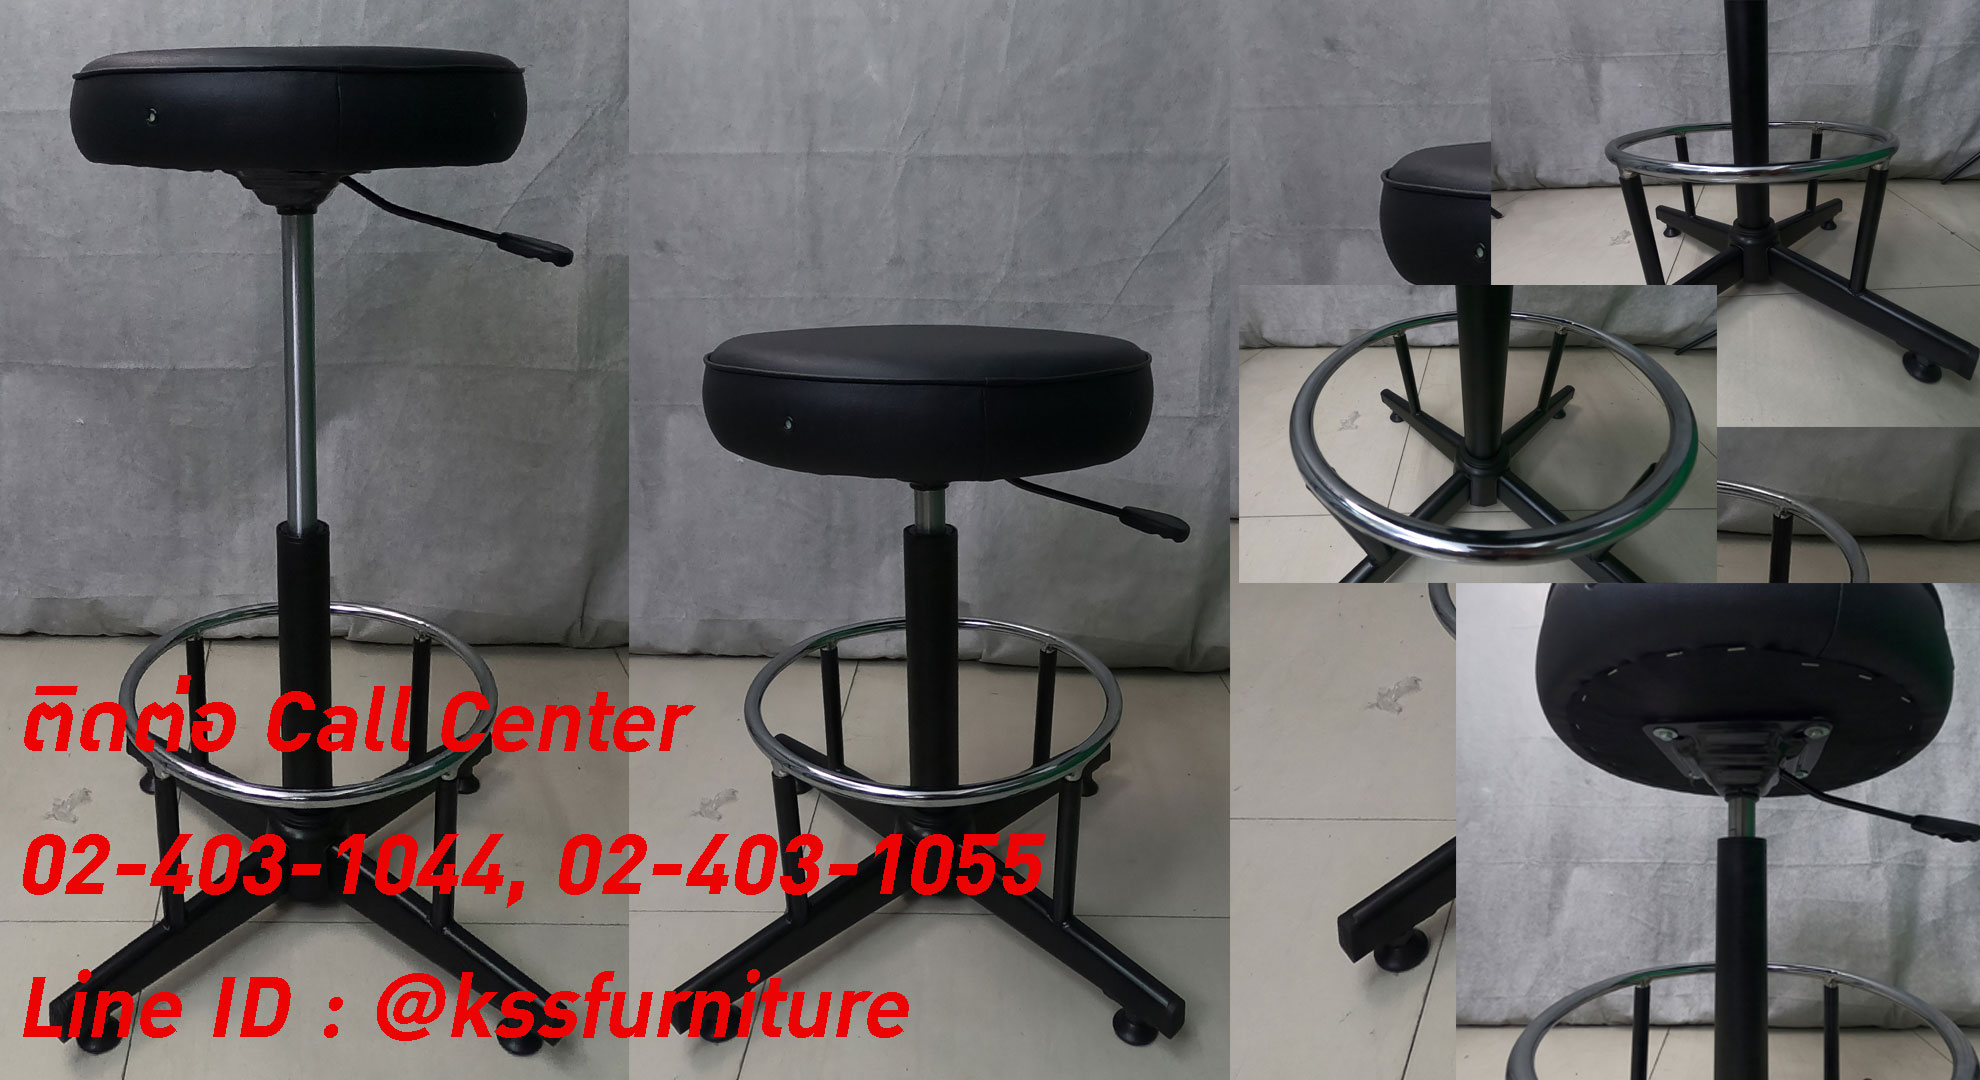 78027::CR-603::An Asahi CR-603 series stool with metal base, providing adjustable locked-screw/gas lift extension. 3-year warranty for the frame of a chair under normal application and 1-year warranty for the plastic base and accessories. Dimension (WxSL) cm : 37x61. Available in 3 seat styles: PVC Leather, PU Leather and Cotton.